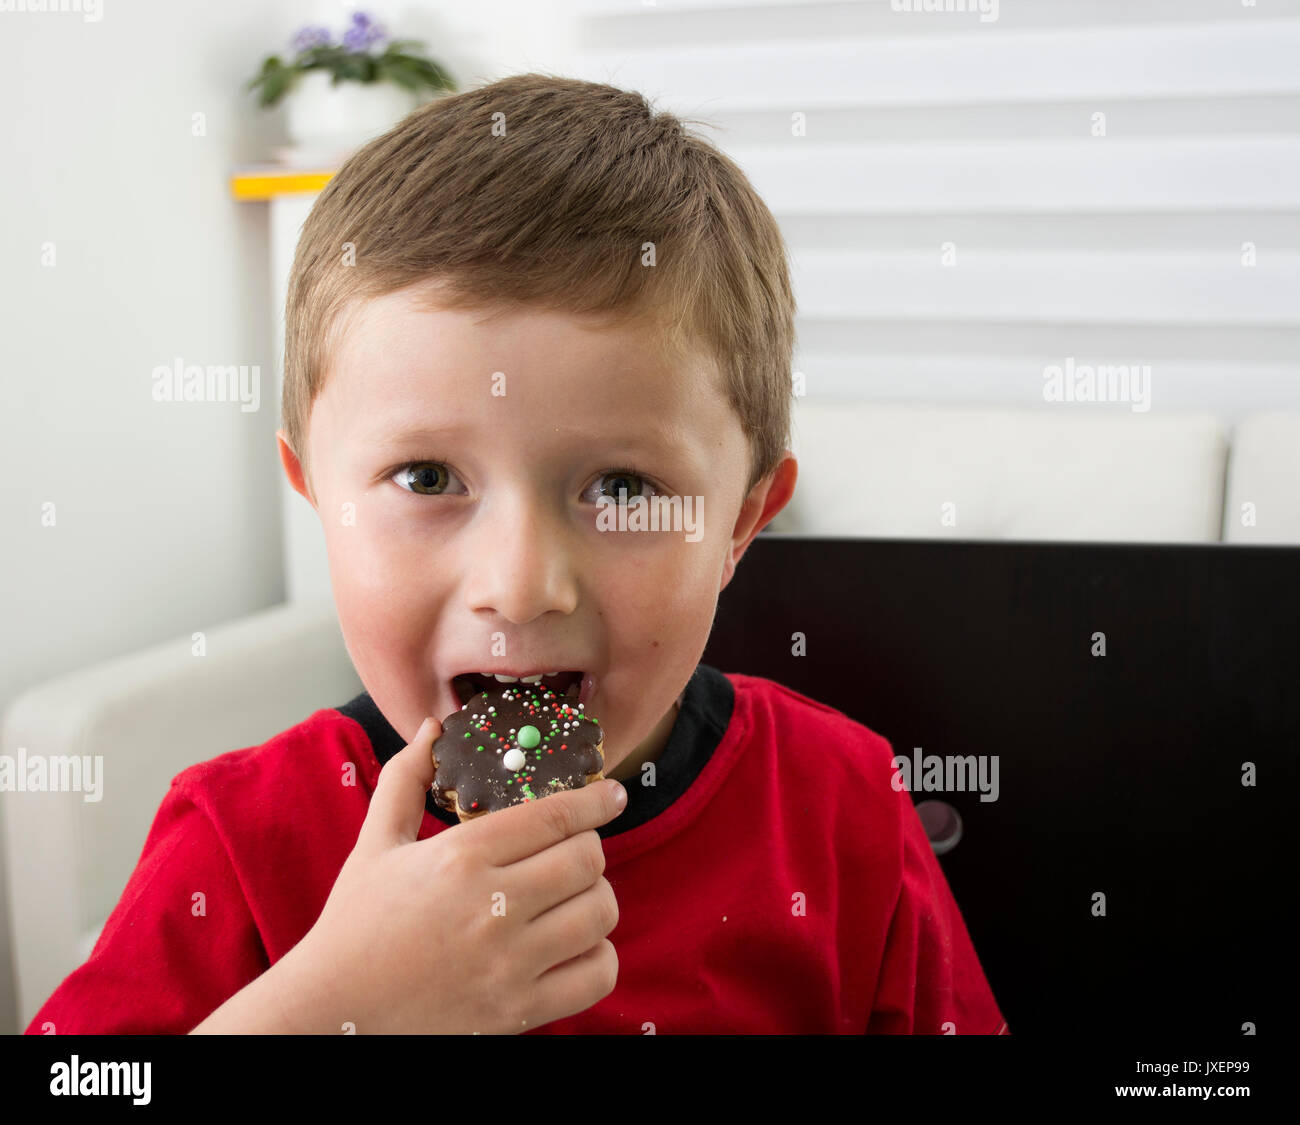 Smart and cheerful boy offering you a chocolate cookie. Stock Photo